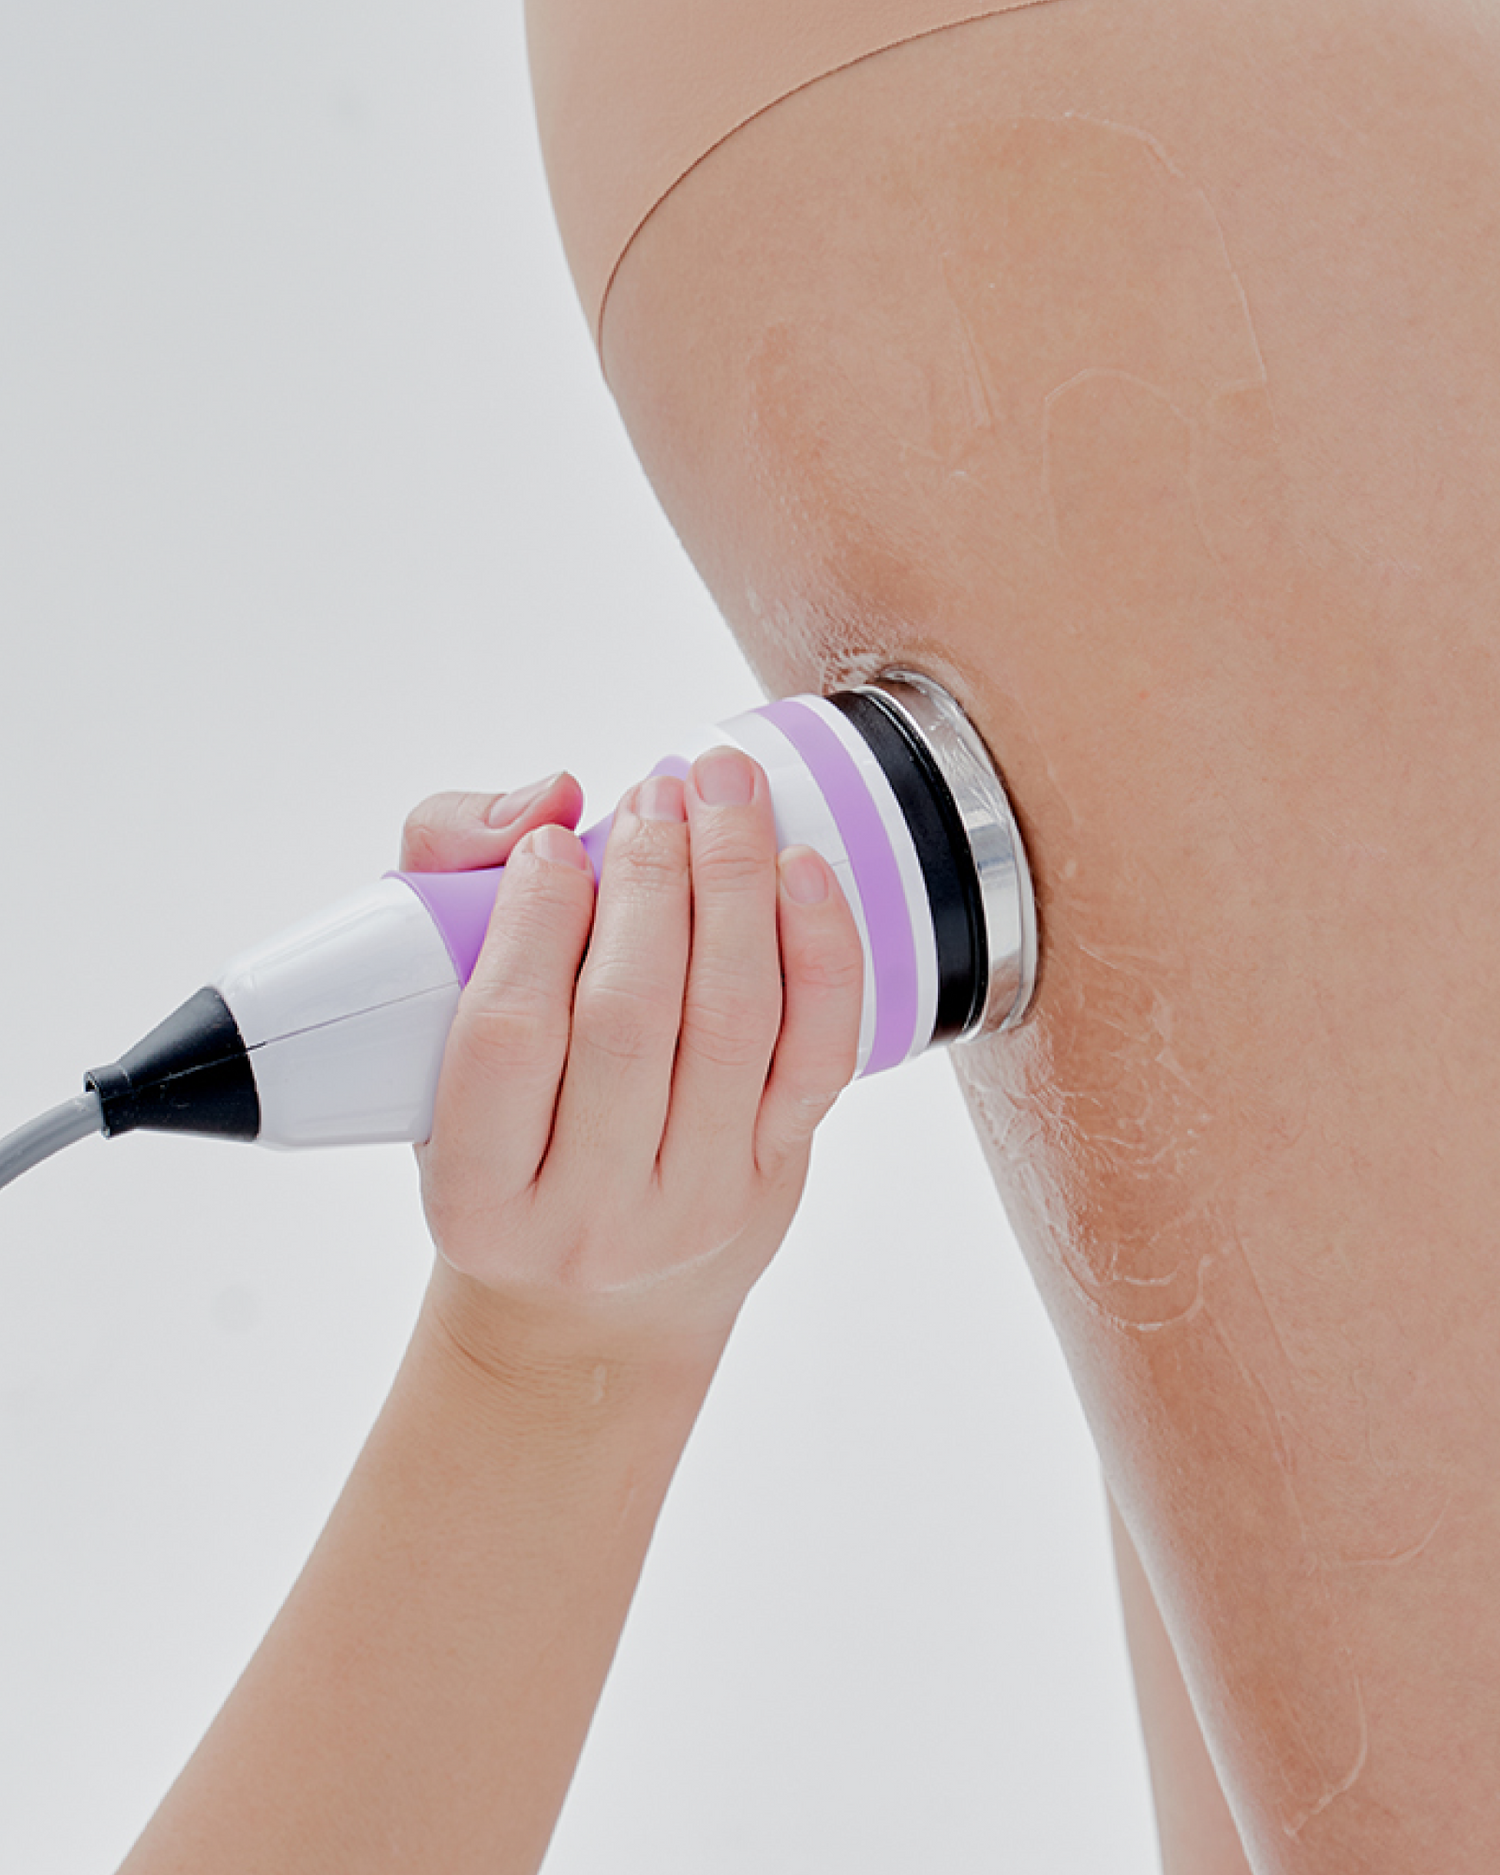 9 Reasons You Need To Try Cavitation